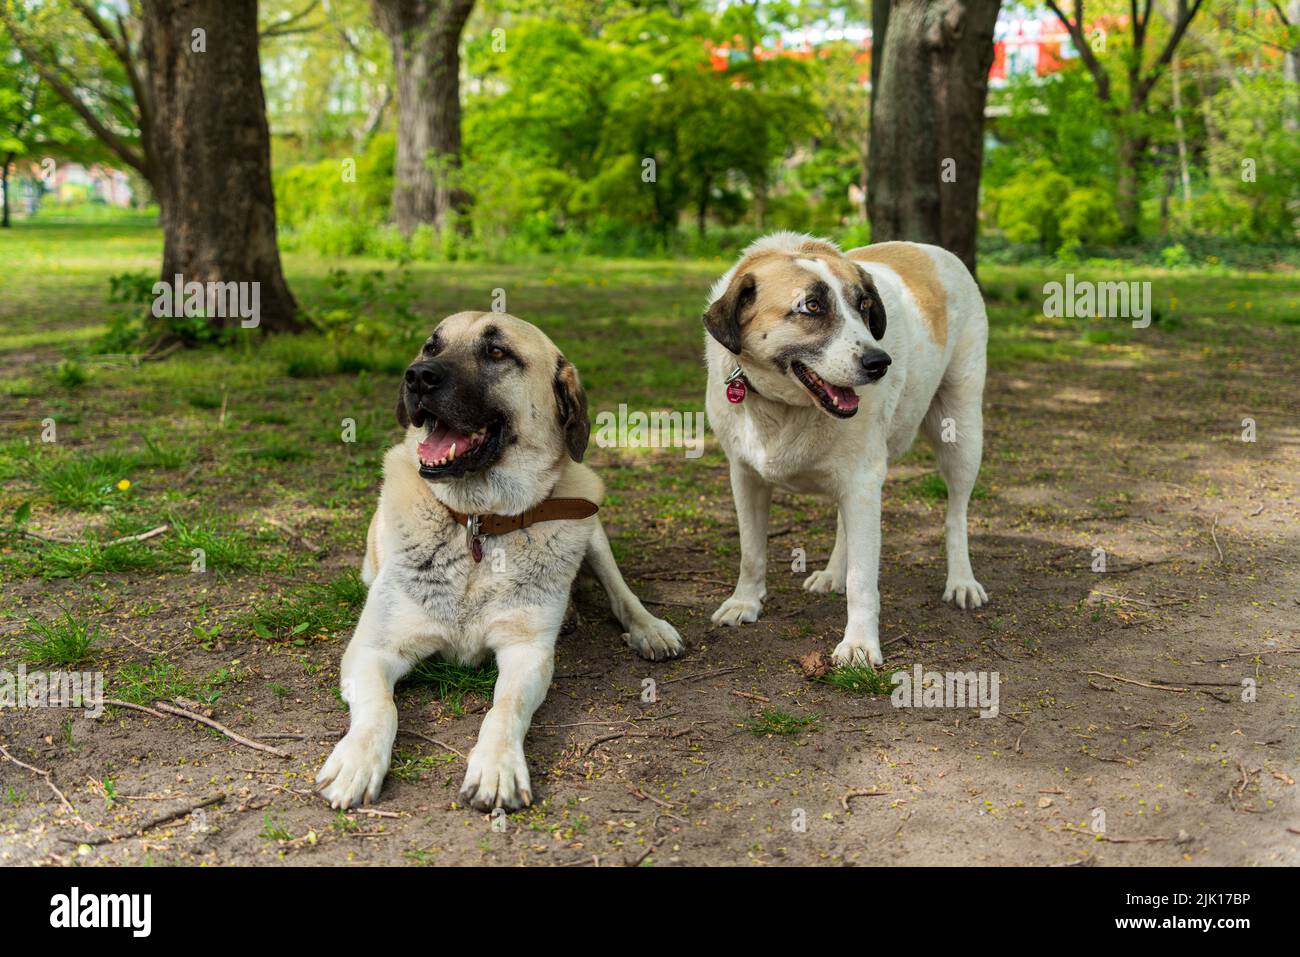 A selective focus shot of an Anatolian Shepherd dog and a mixed breed dog in a park relaxing Stock Photo